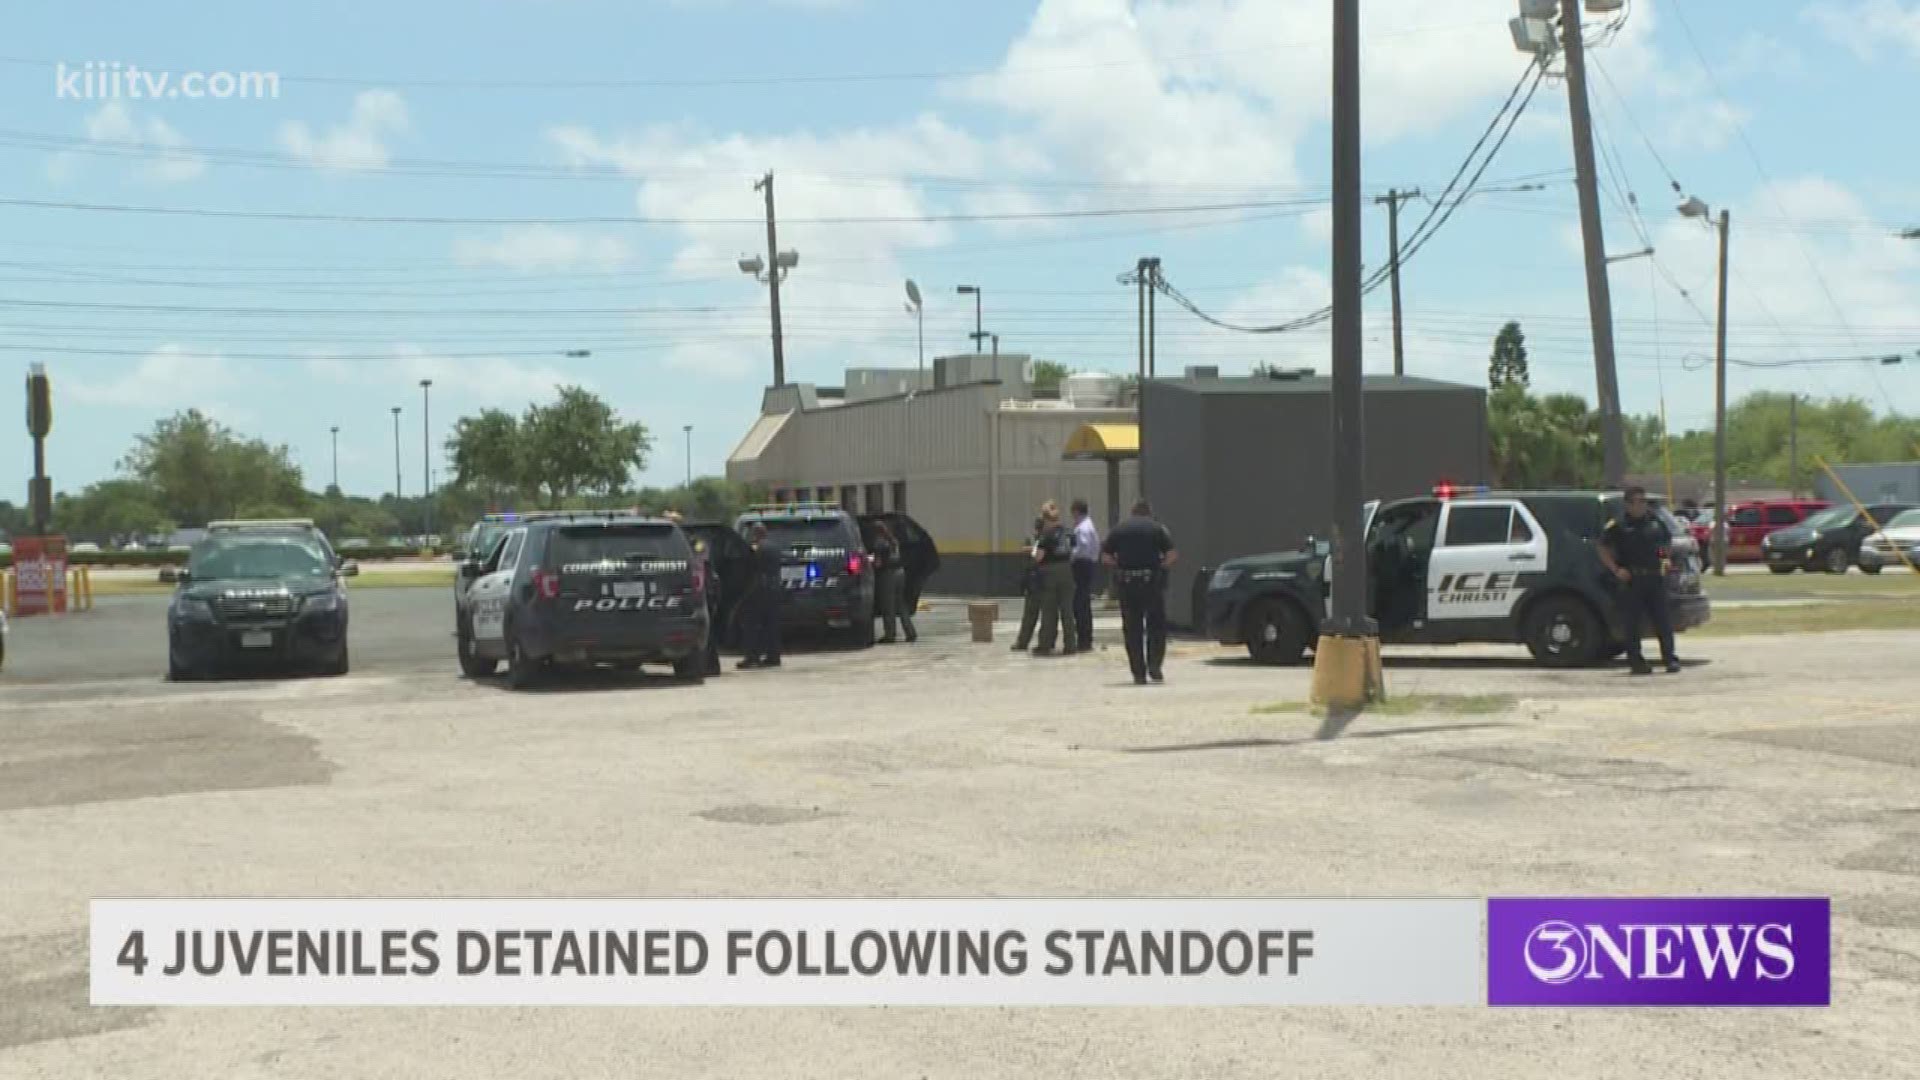 The Corpus Christi Police Department's SWAT team was called to a standoff at a business in the 2800 block of Ayers Street just after 10:30 a.m. Tuesday.